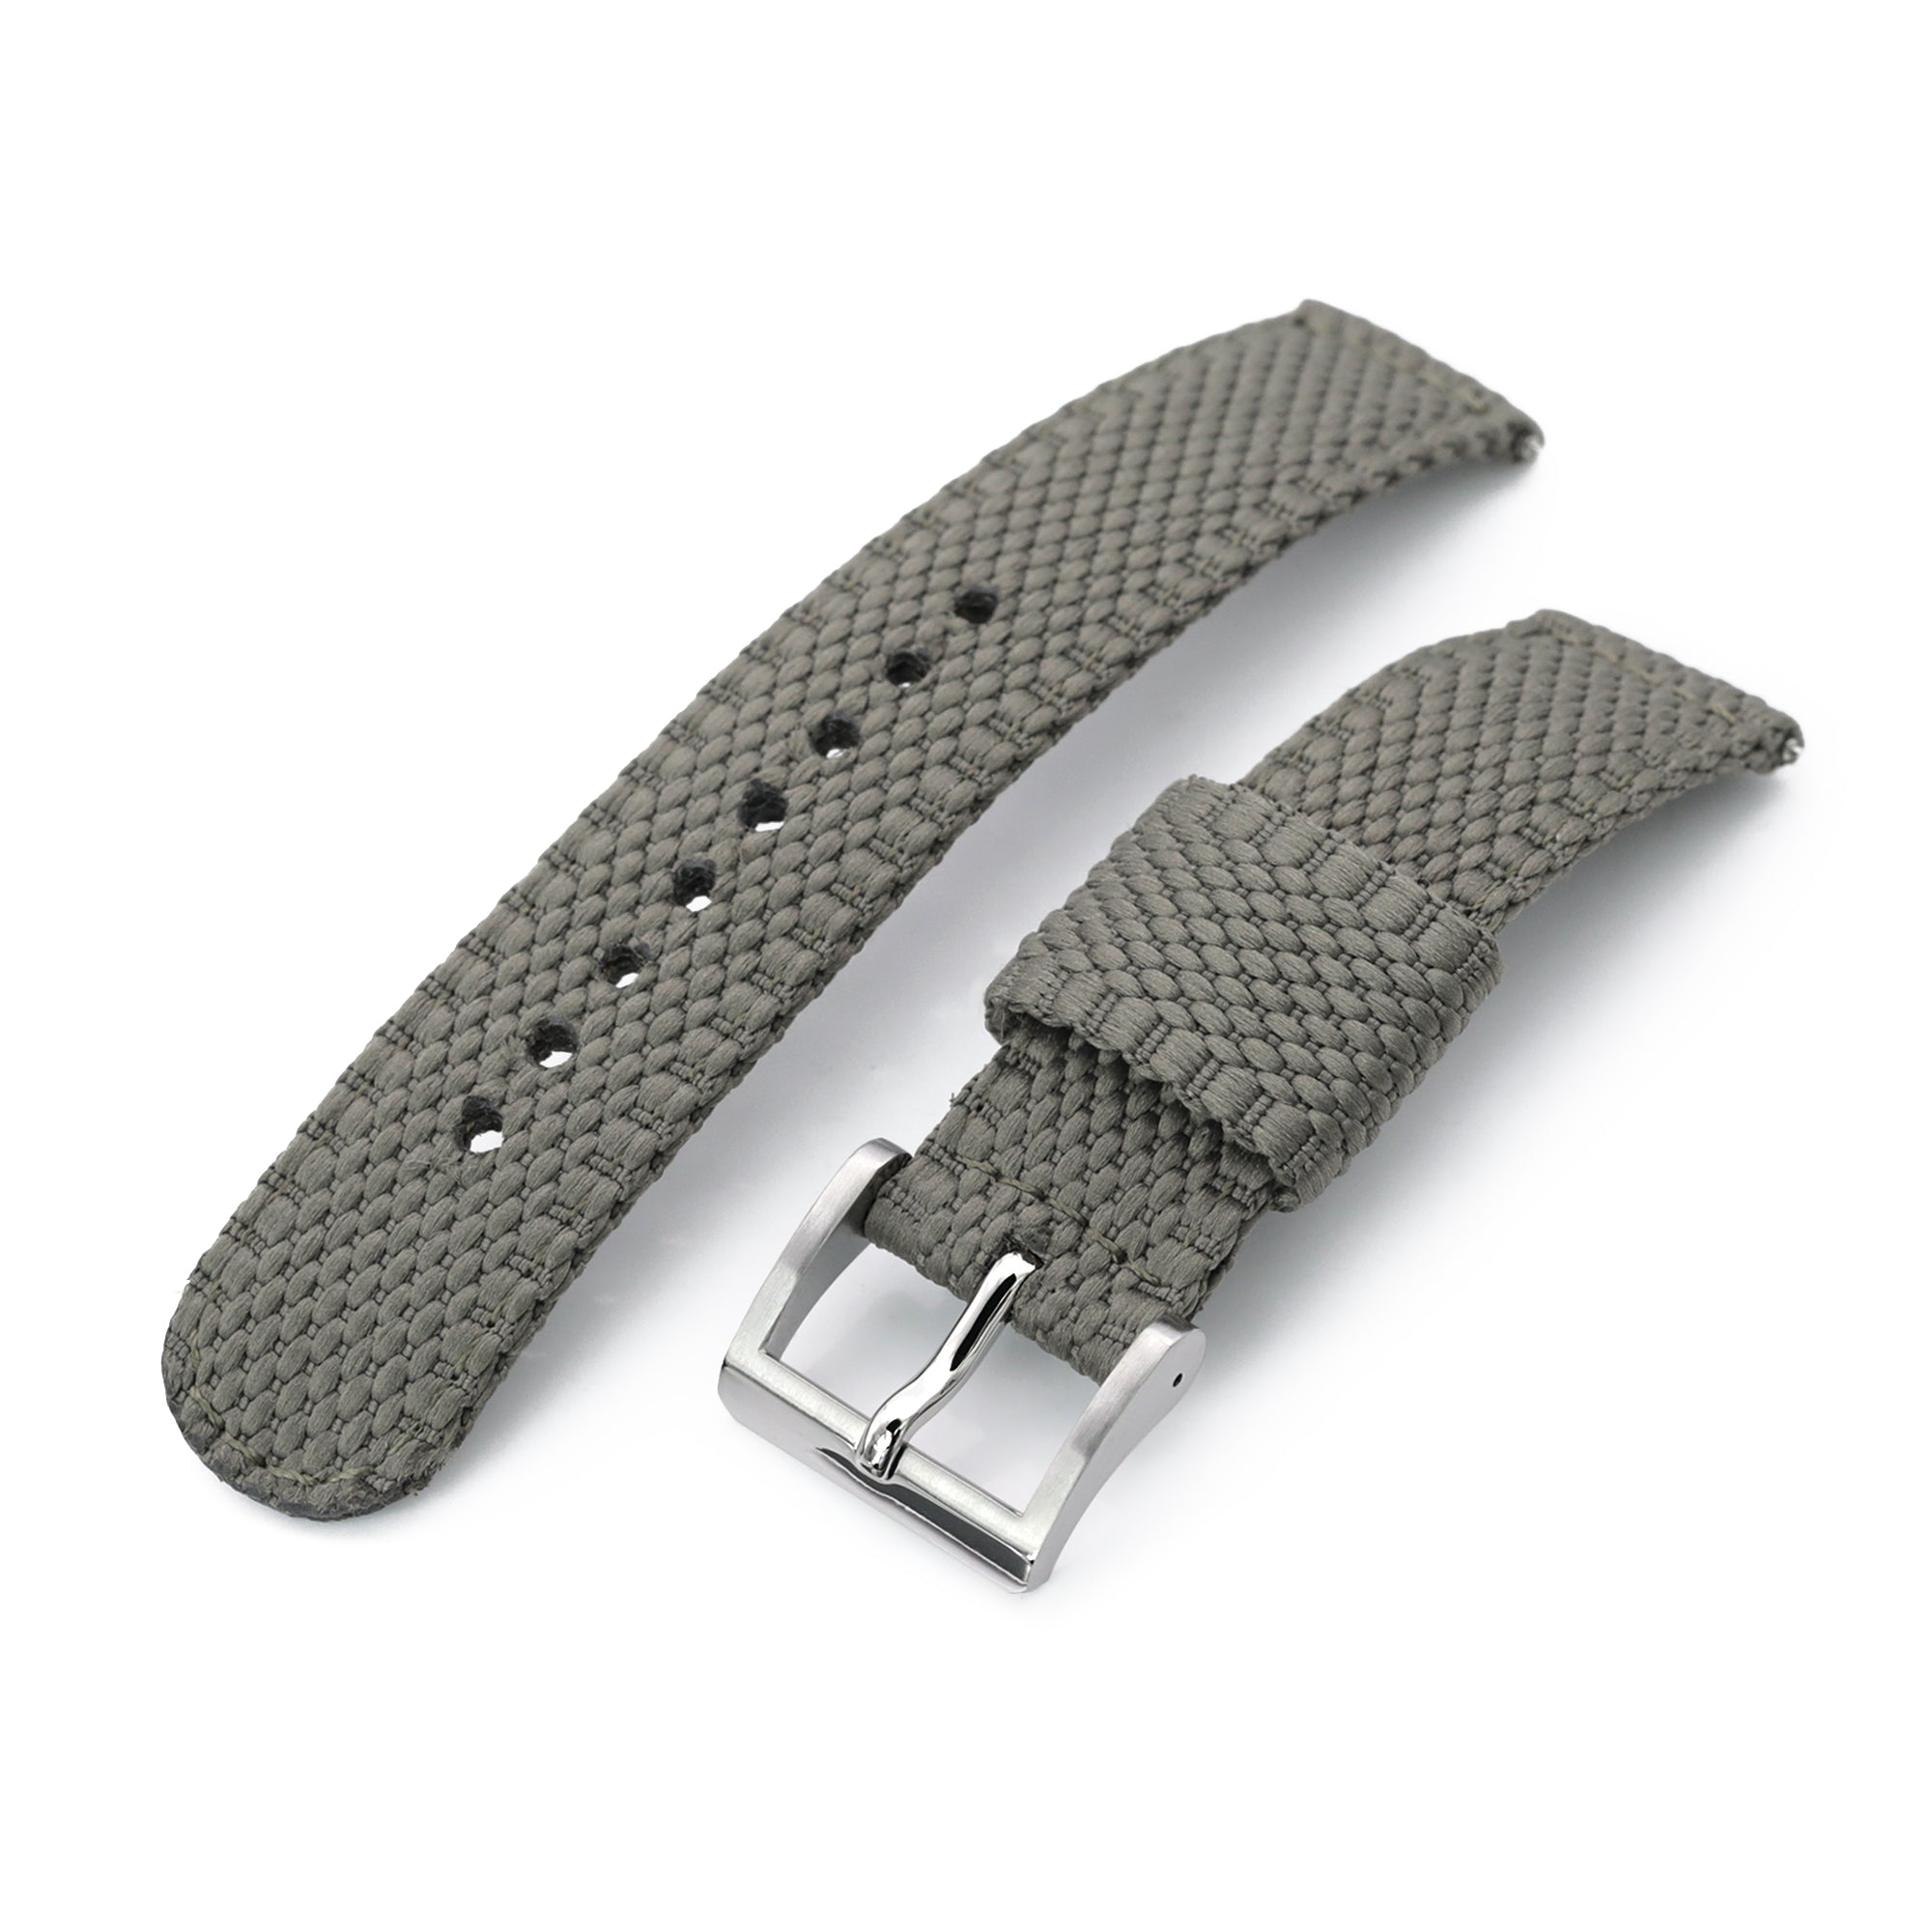 2-pcs Perlon Unique Pattern Military Green Watch Band, Polished Buckle Strapcode Watch Bands